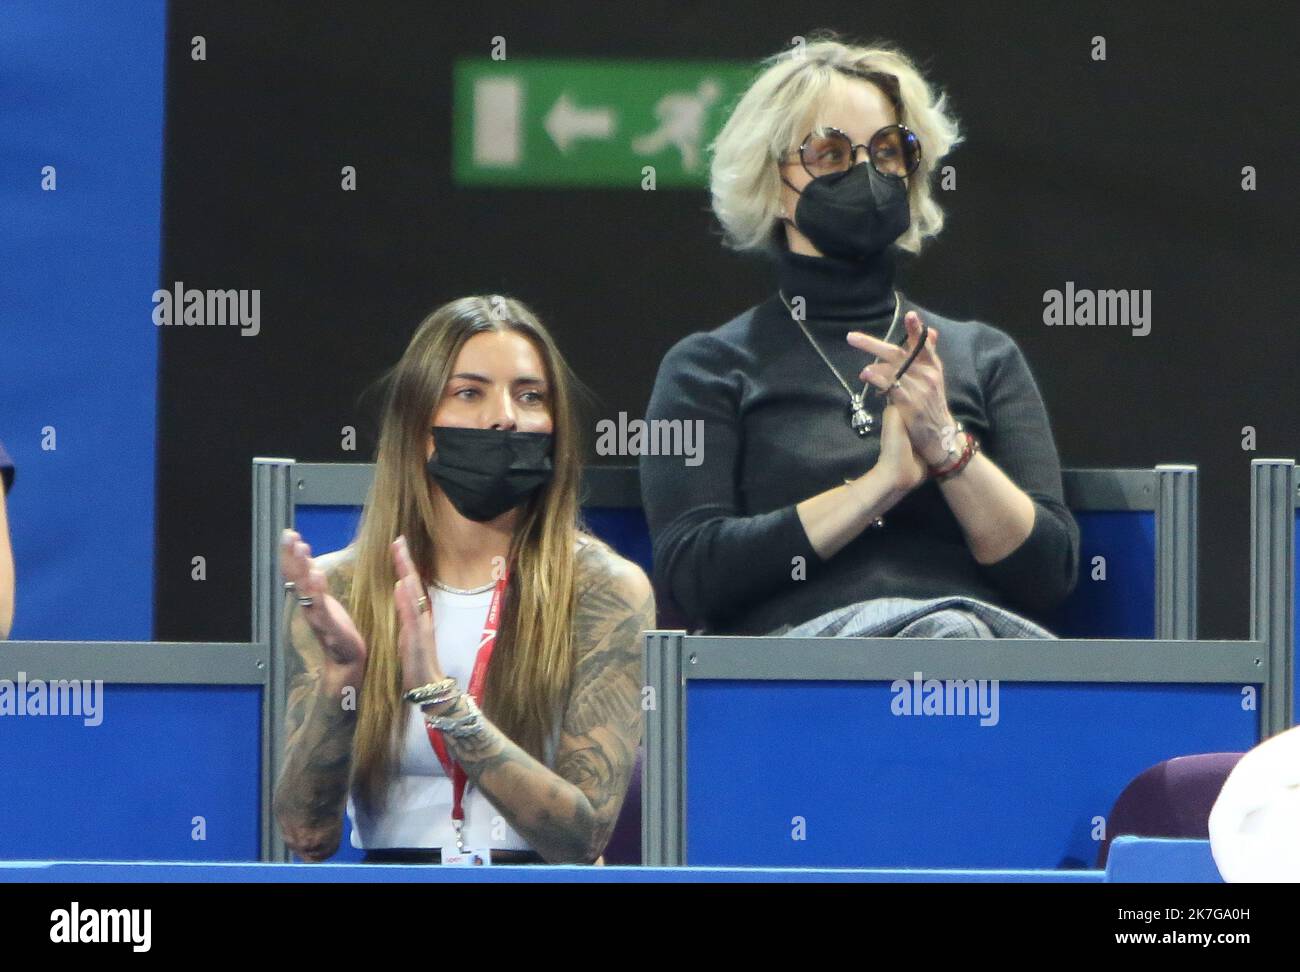 ©Laurent Lairys/MAXPPP - Sophia Thomalla, girlfriend of Alexander Zverev of Germany during the Open Sud 2022, ATP 250 tennis tournament on February 05 , 2022 at Sud de France Arena in Montpellier, France - Photo Laurent Lairys / Stock Photo